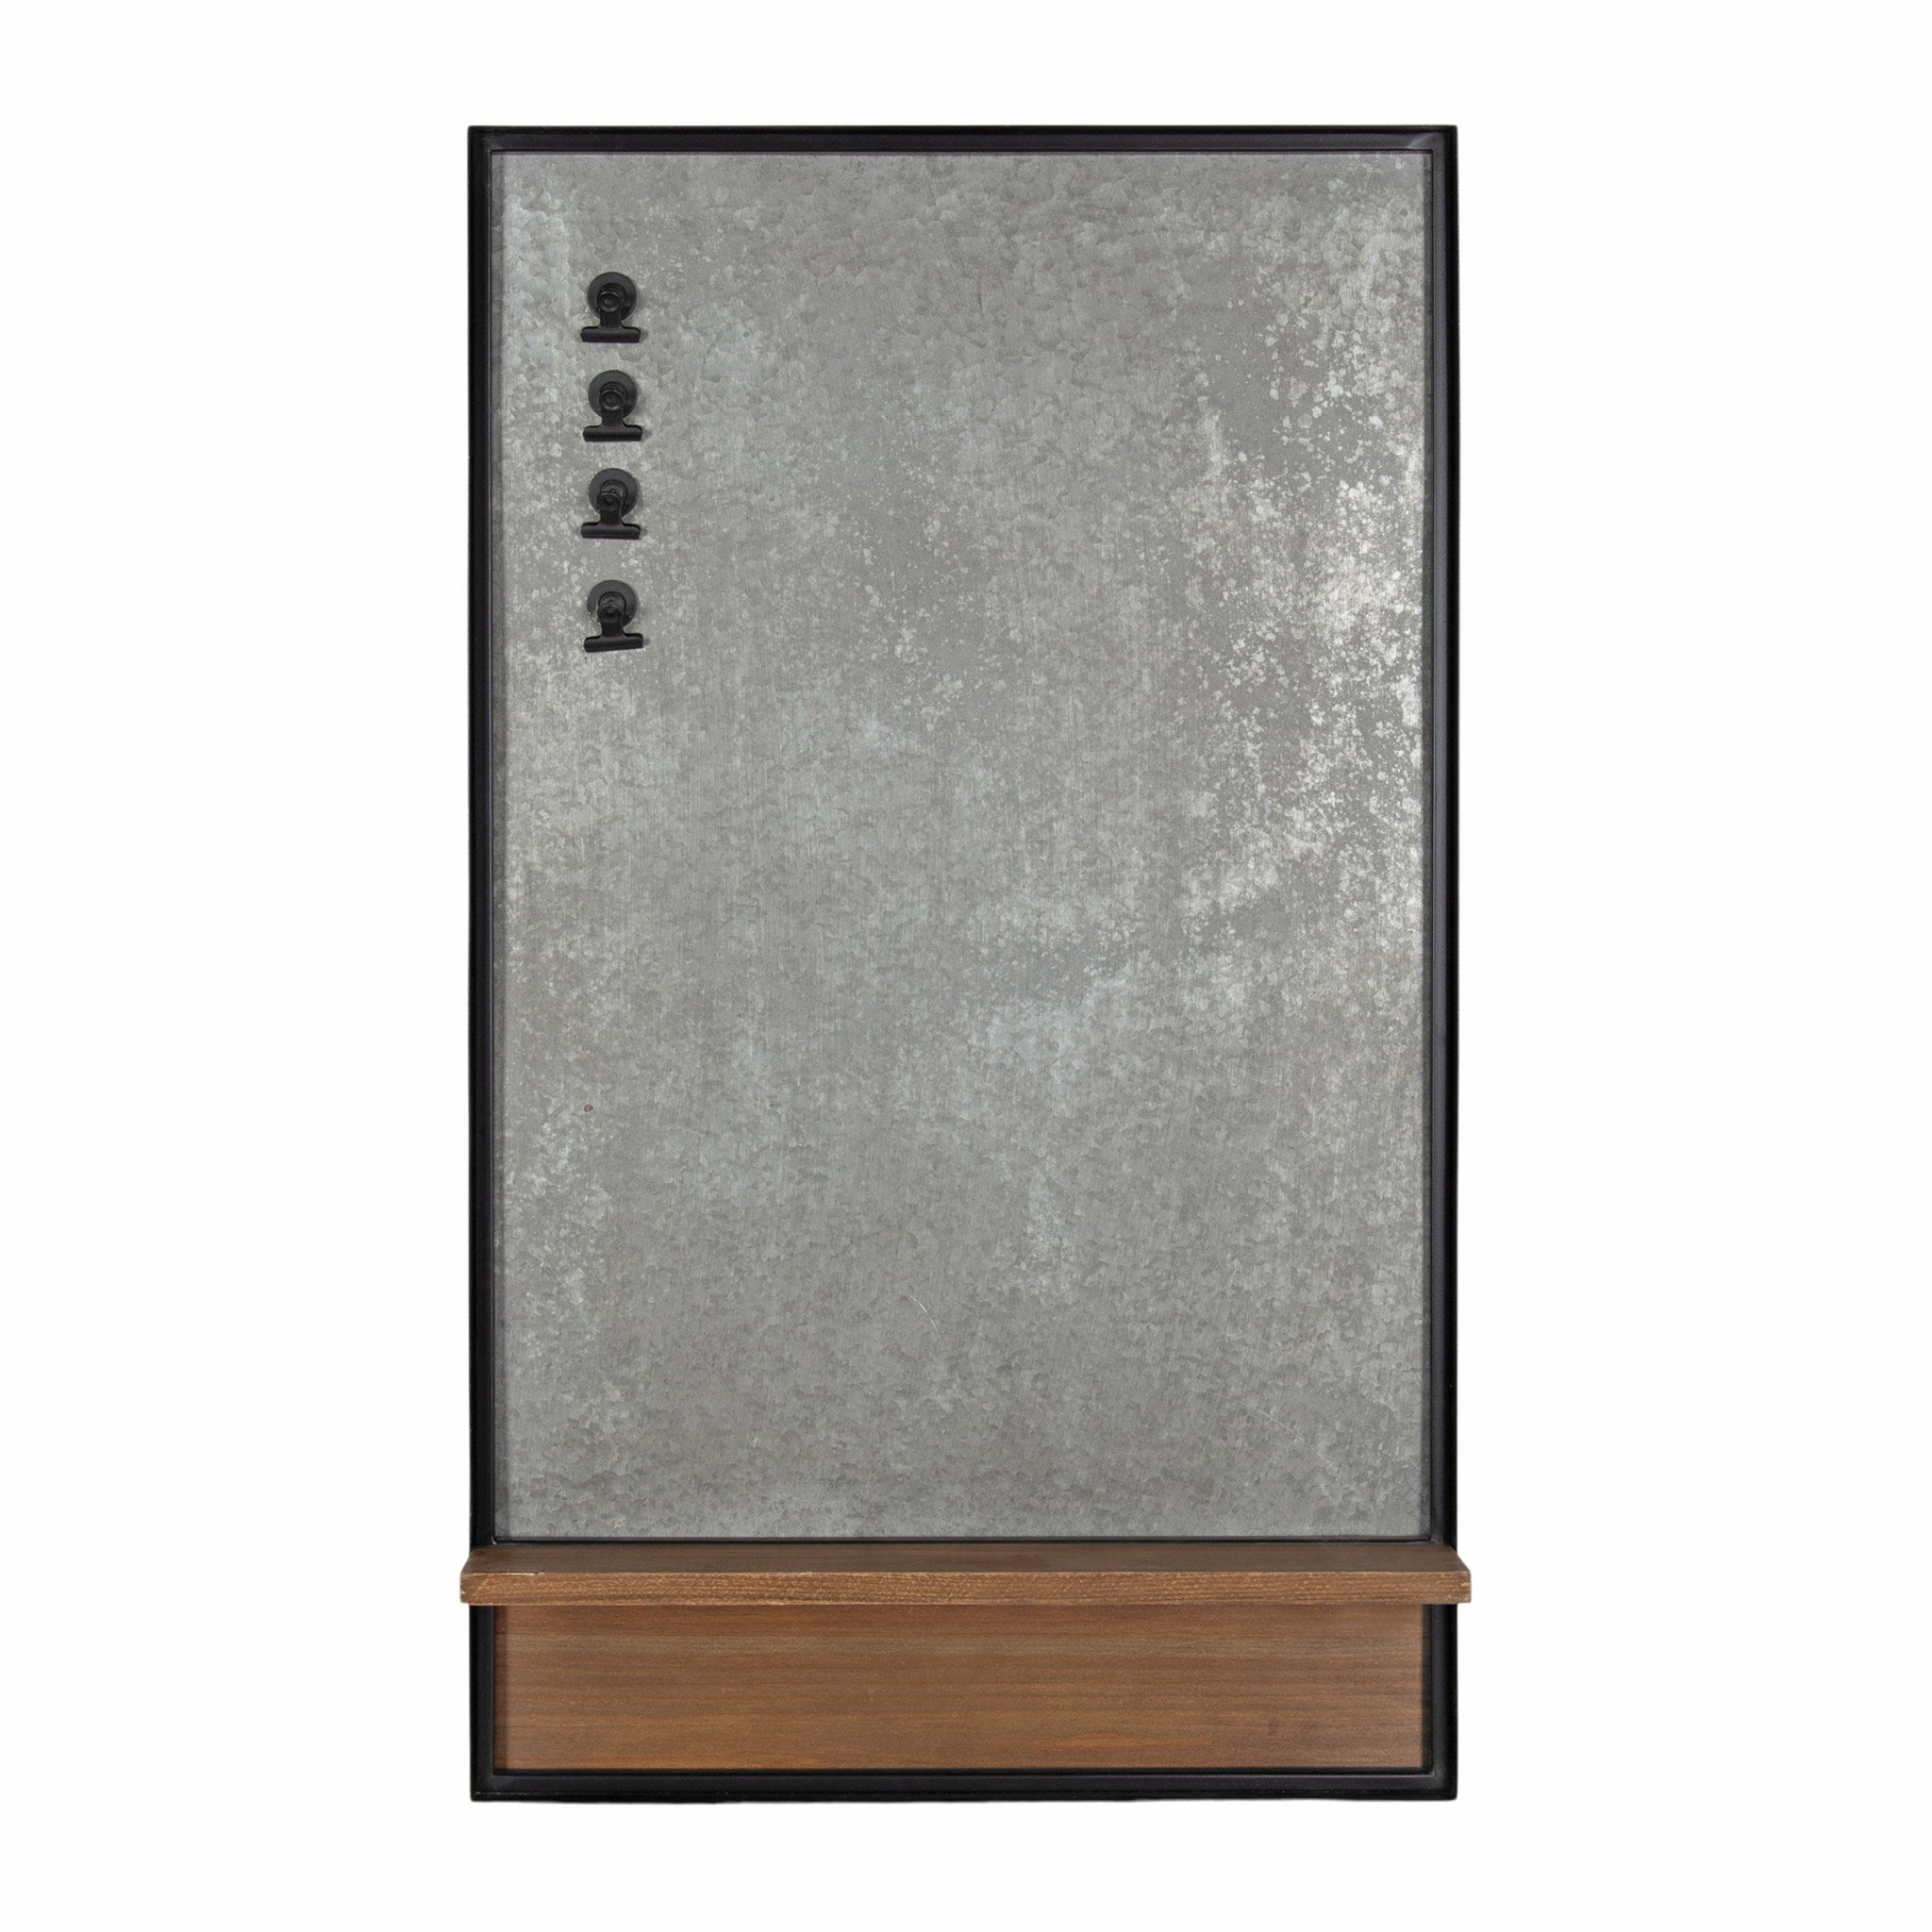 Owing Galvanized Metal Magnetic Board